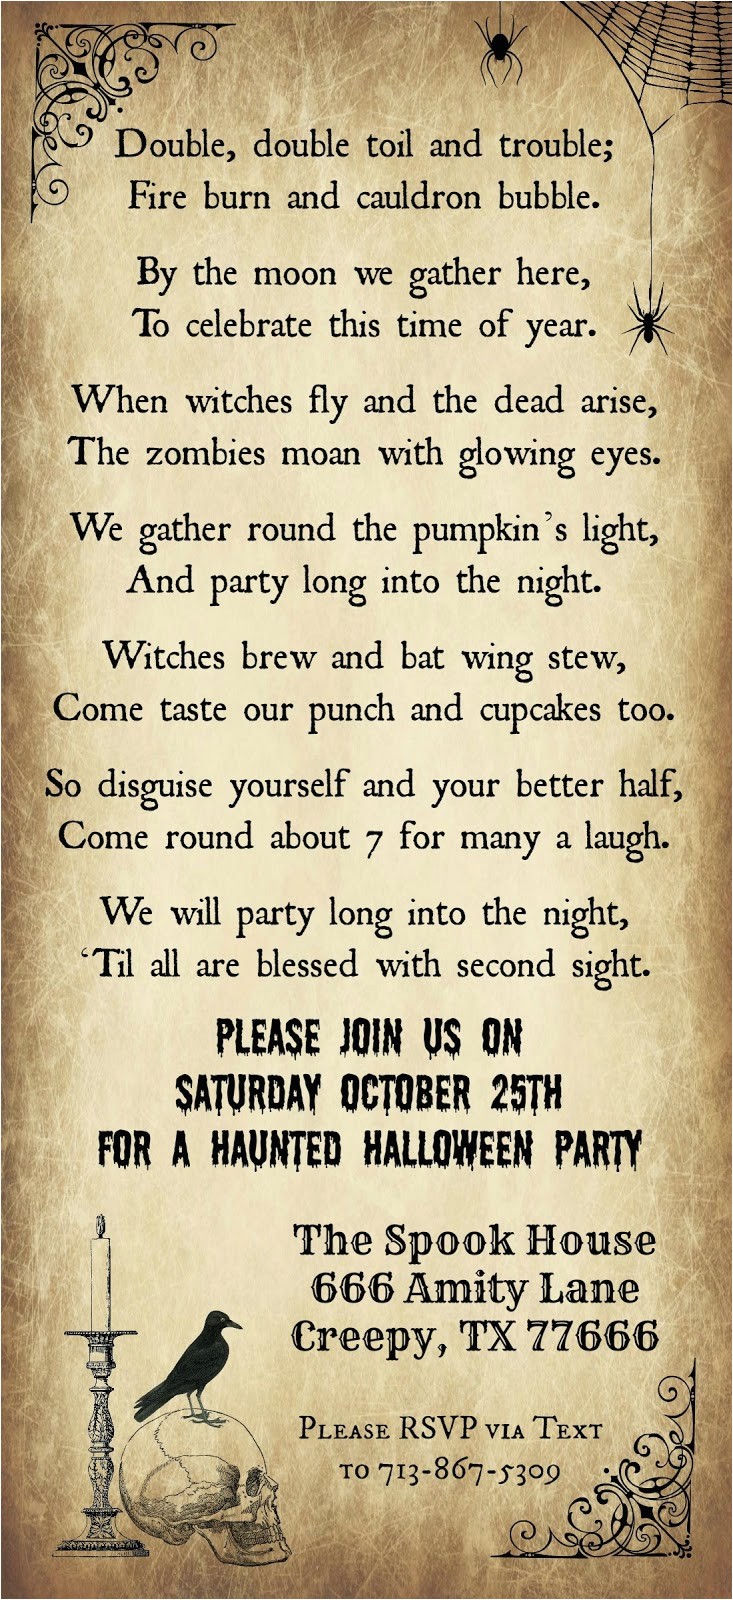 Halloween Party Poem Invite Crafty In Crosby Halloween Party Invitation 2014